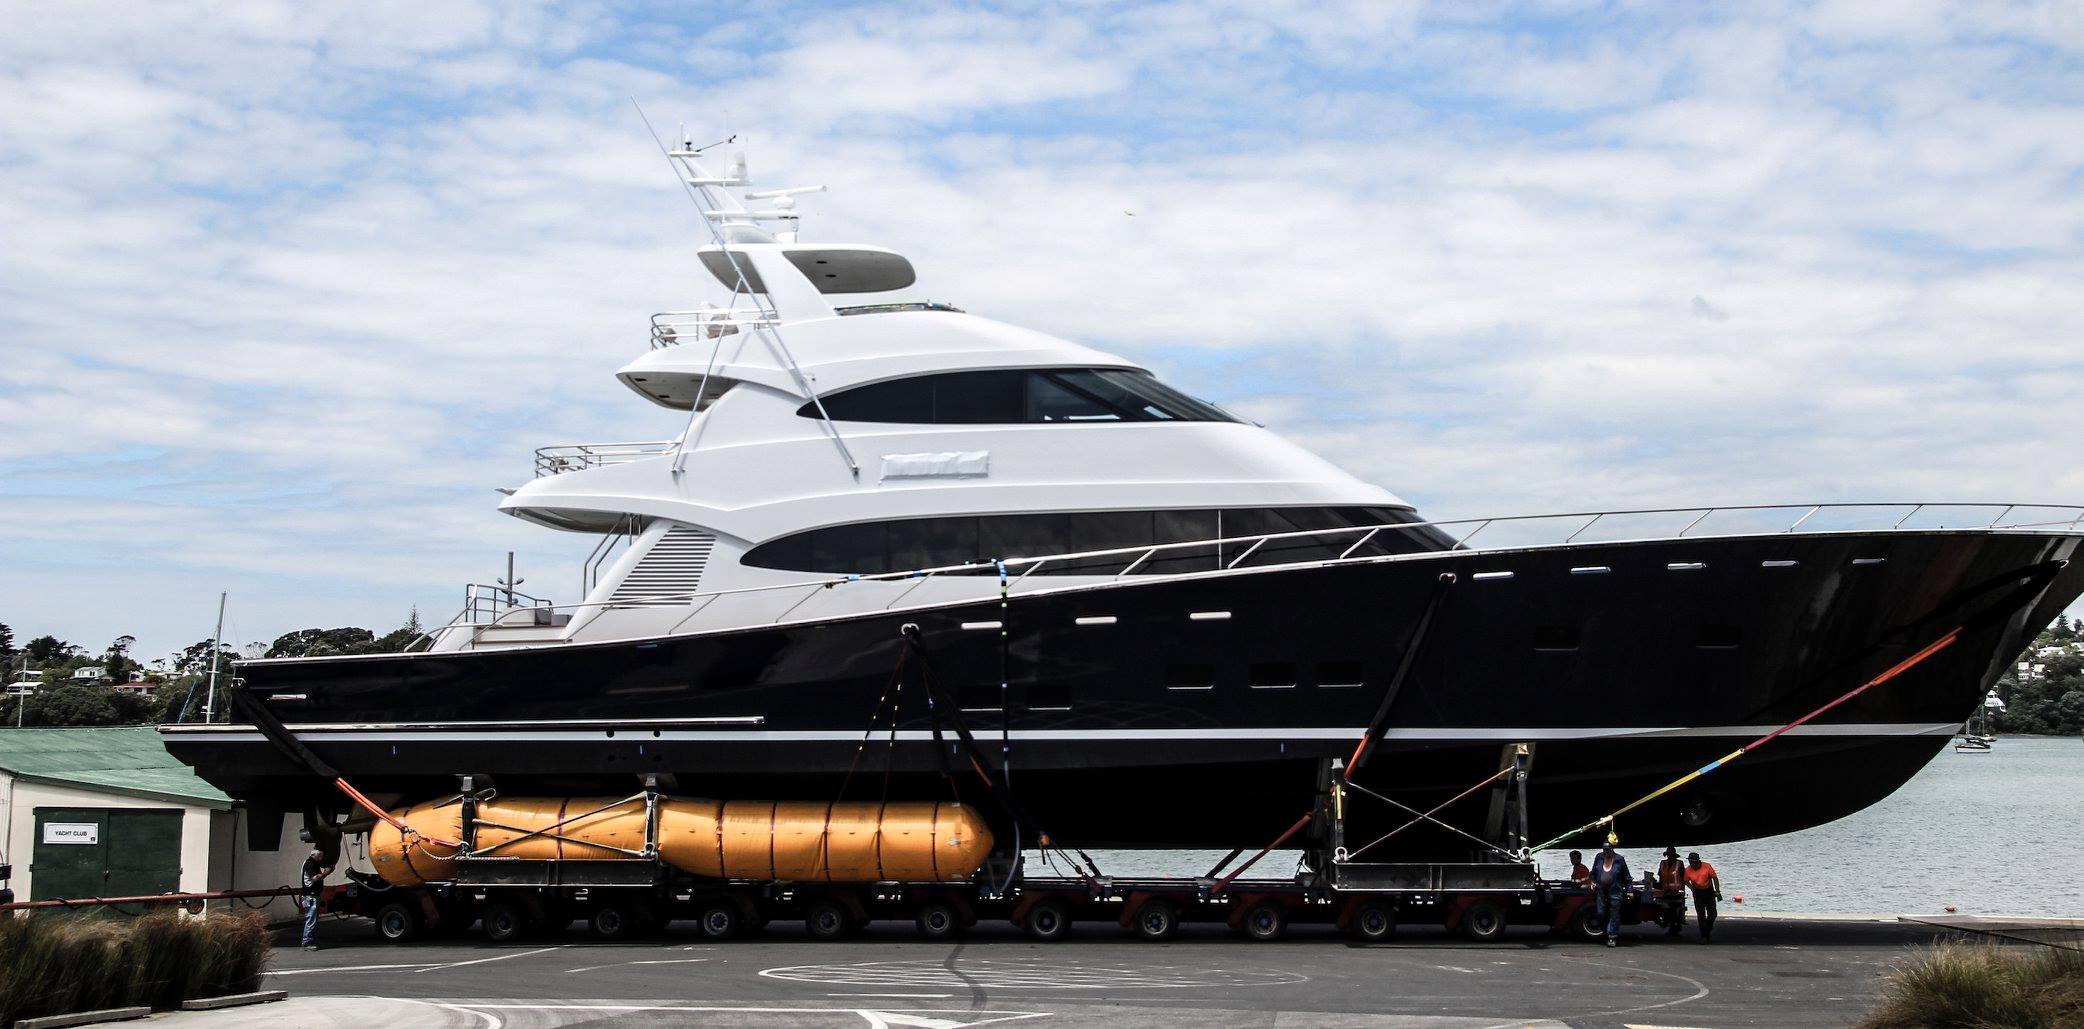 Yachting Developments launches 39.5m Sportsfisher With 2 VG120 units onboard